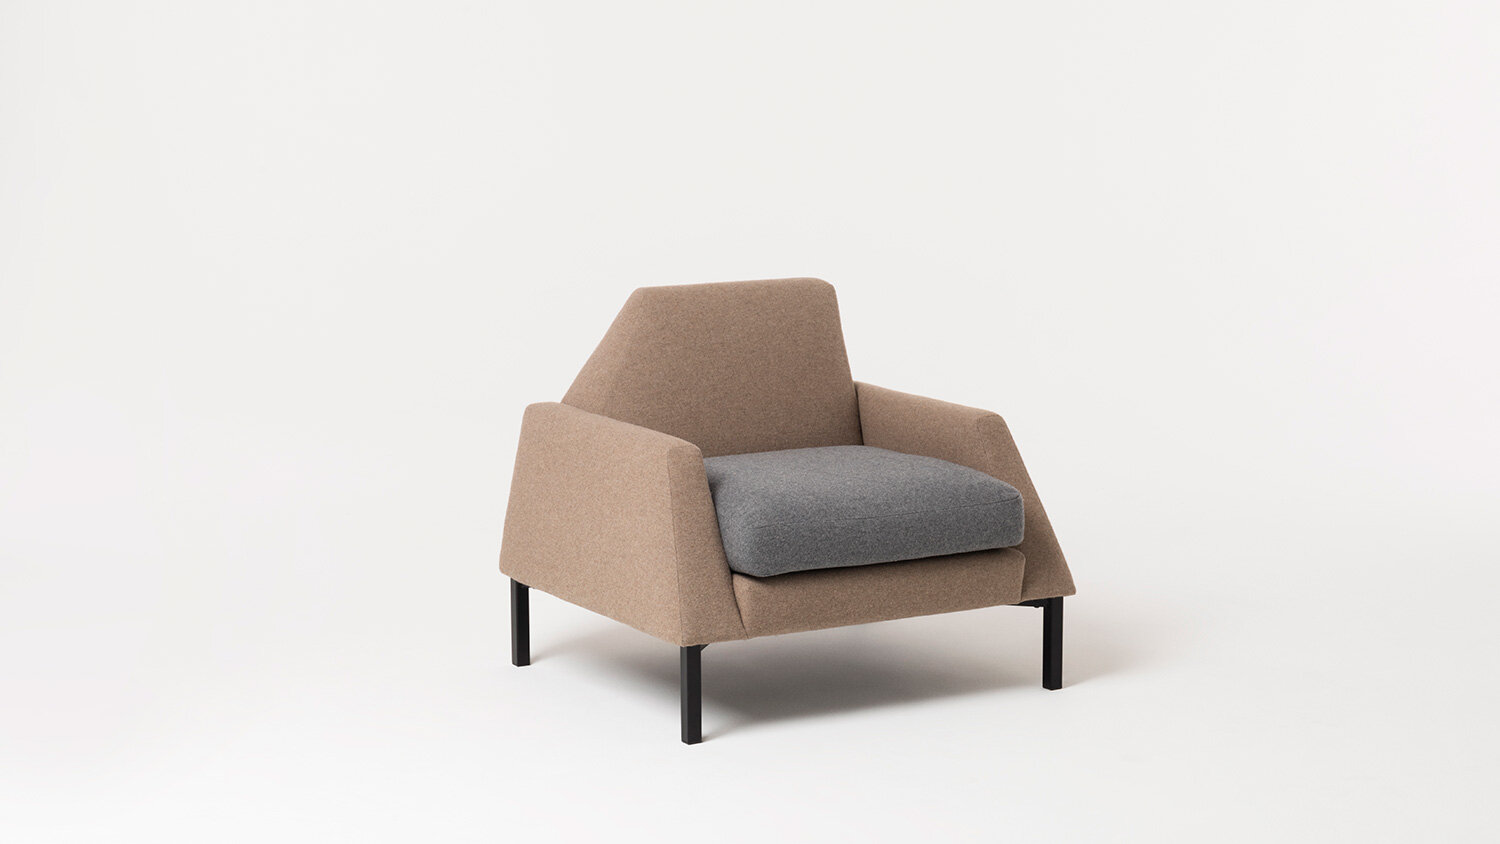 Cyclic manufactured armchair